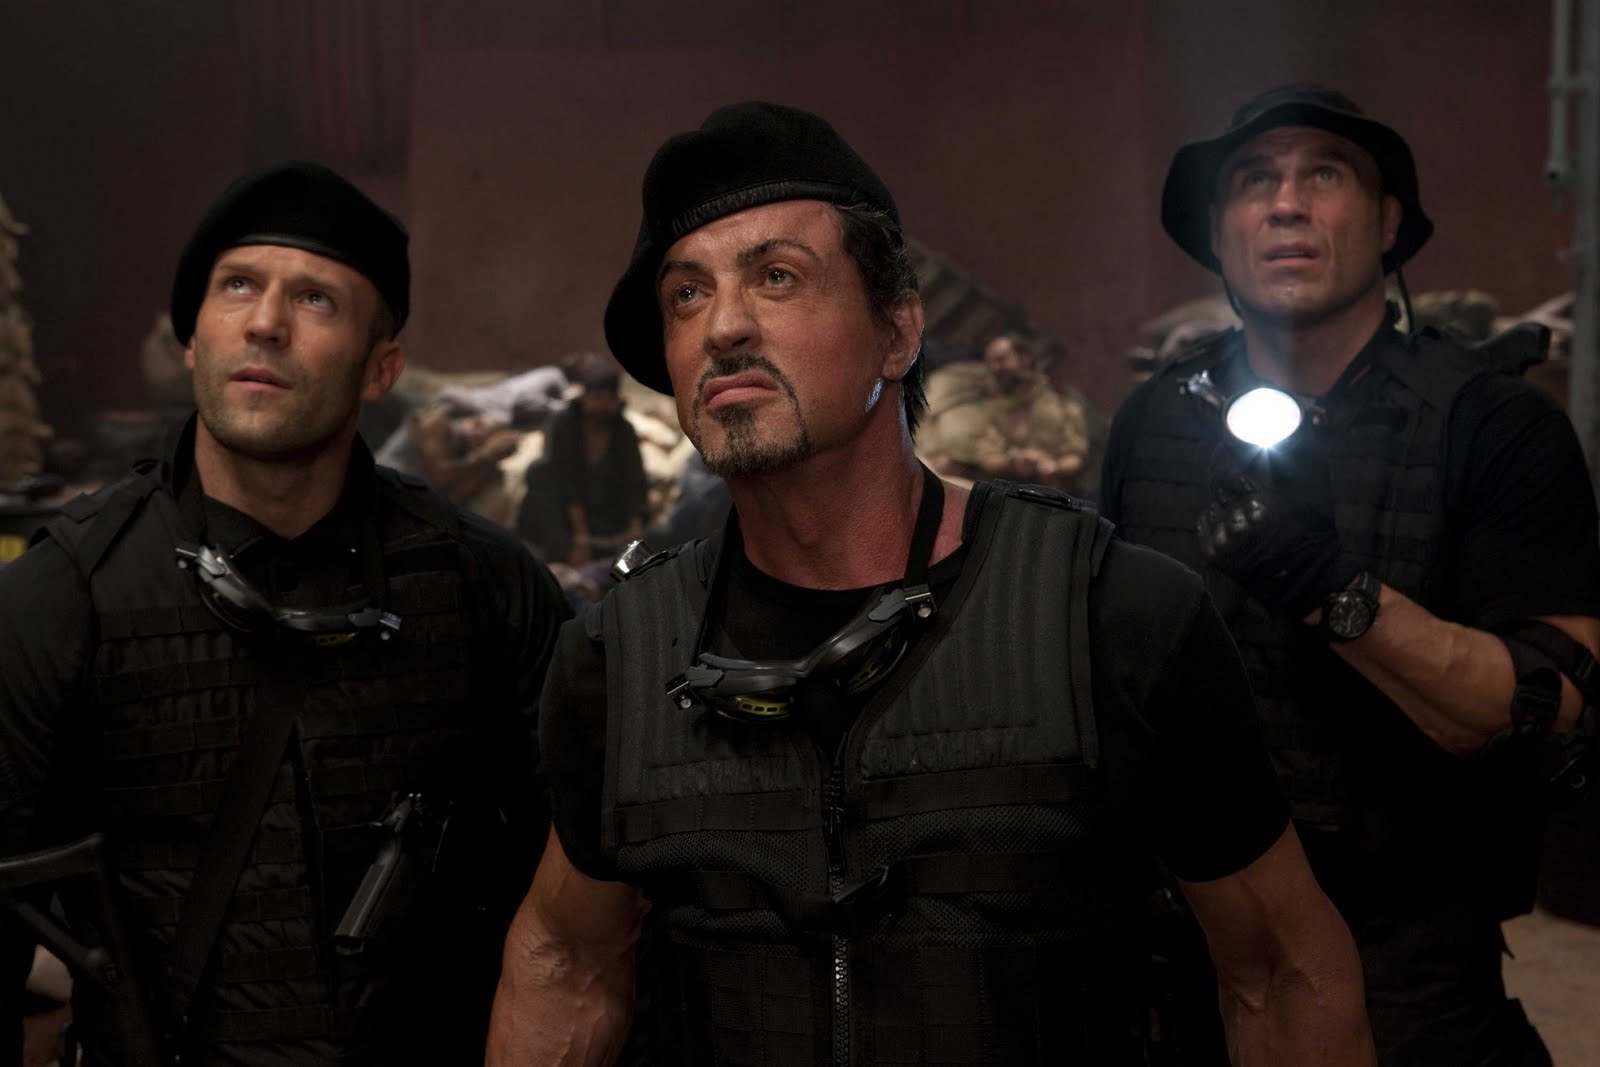 [Jason Statham, Sylvester Stallone and Dolph Lungren in The Expendables[5].jpg]